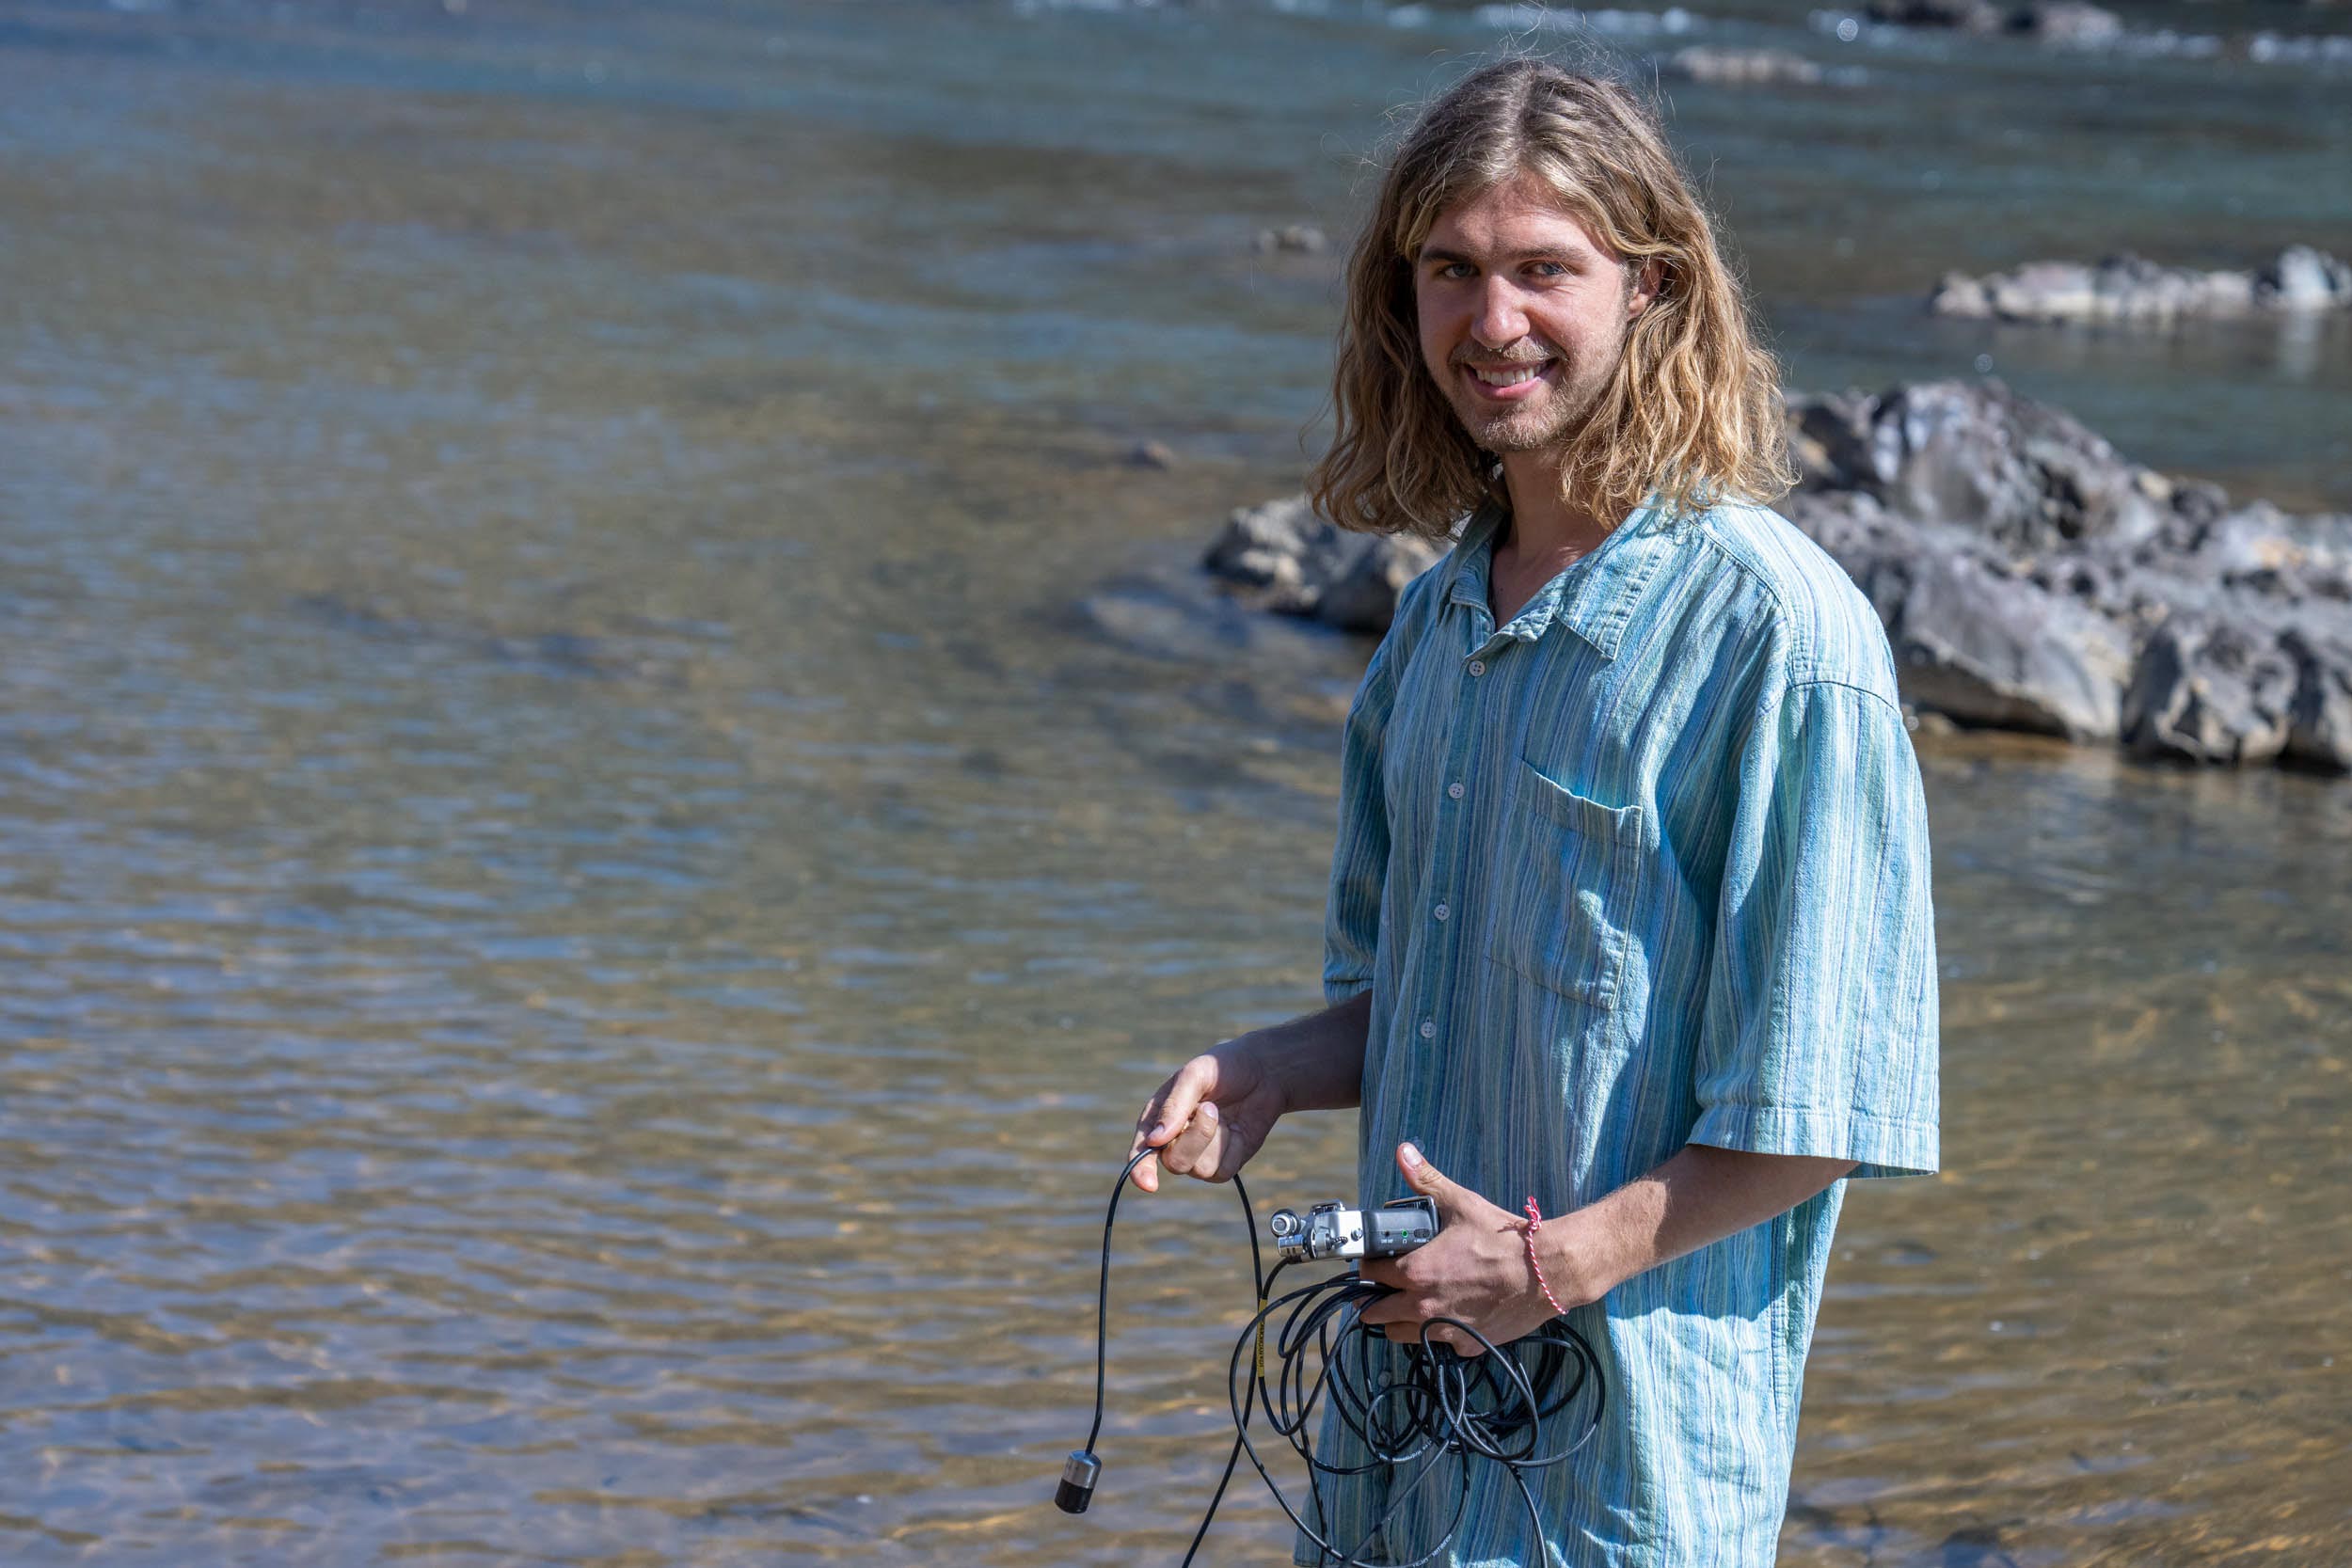 Davis Coffey stands in a stream, holding a device and a mass of cables, and smiles at the camera